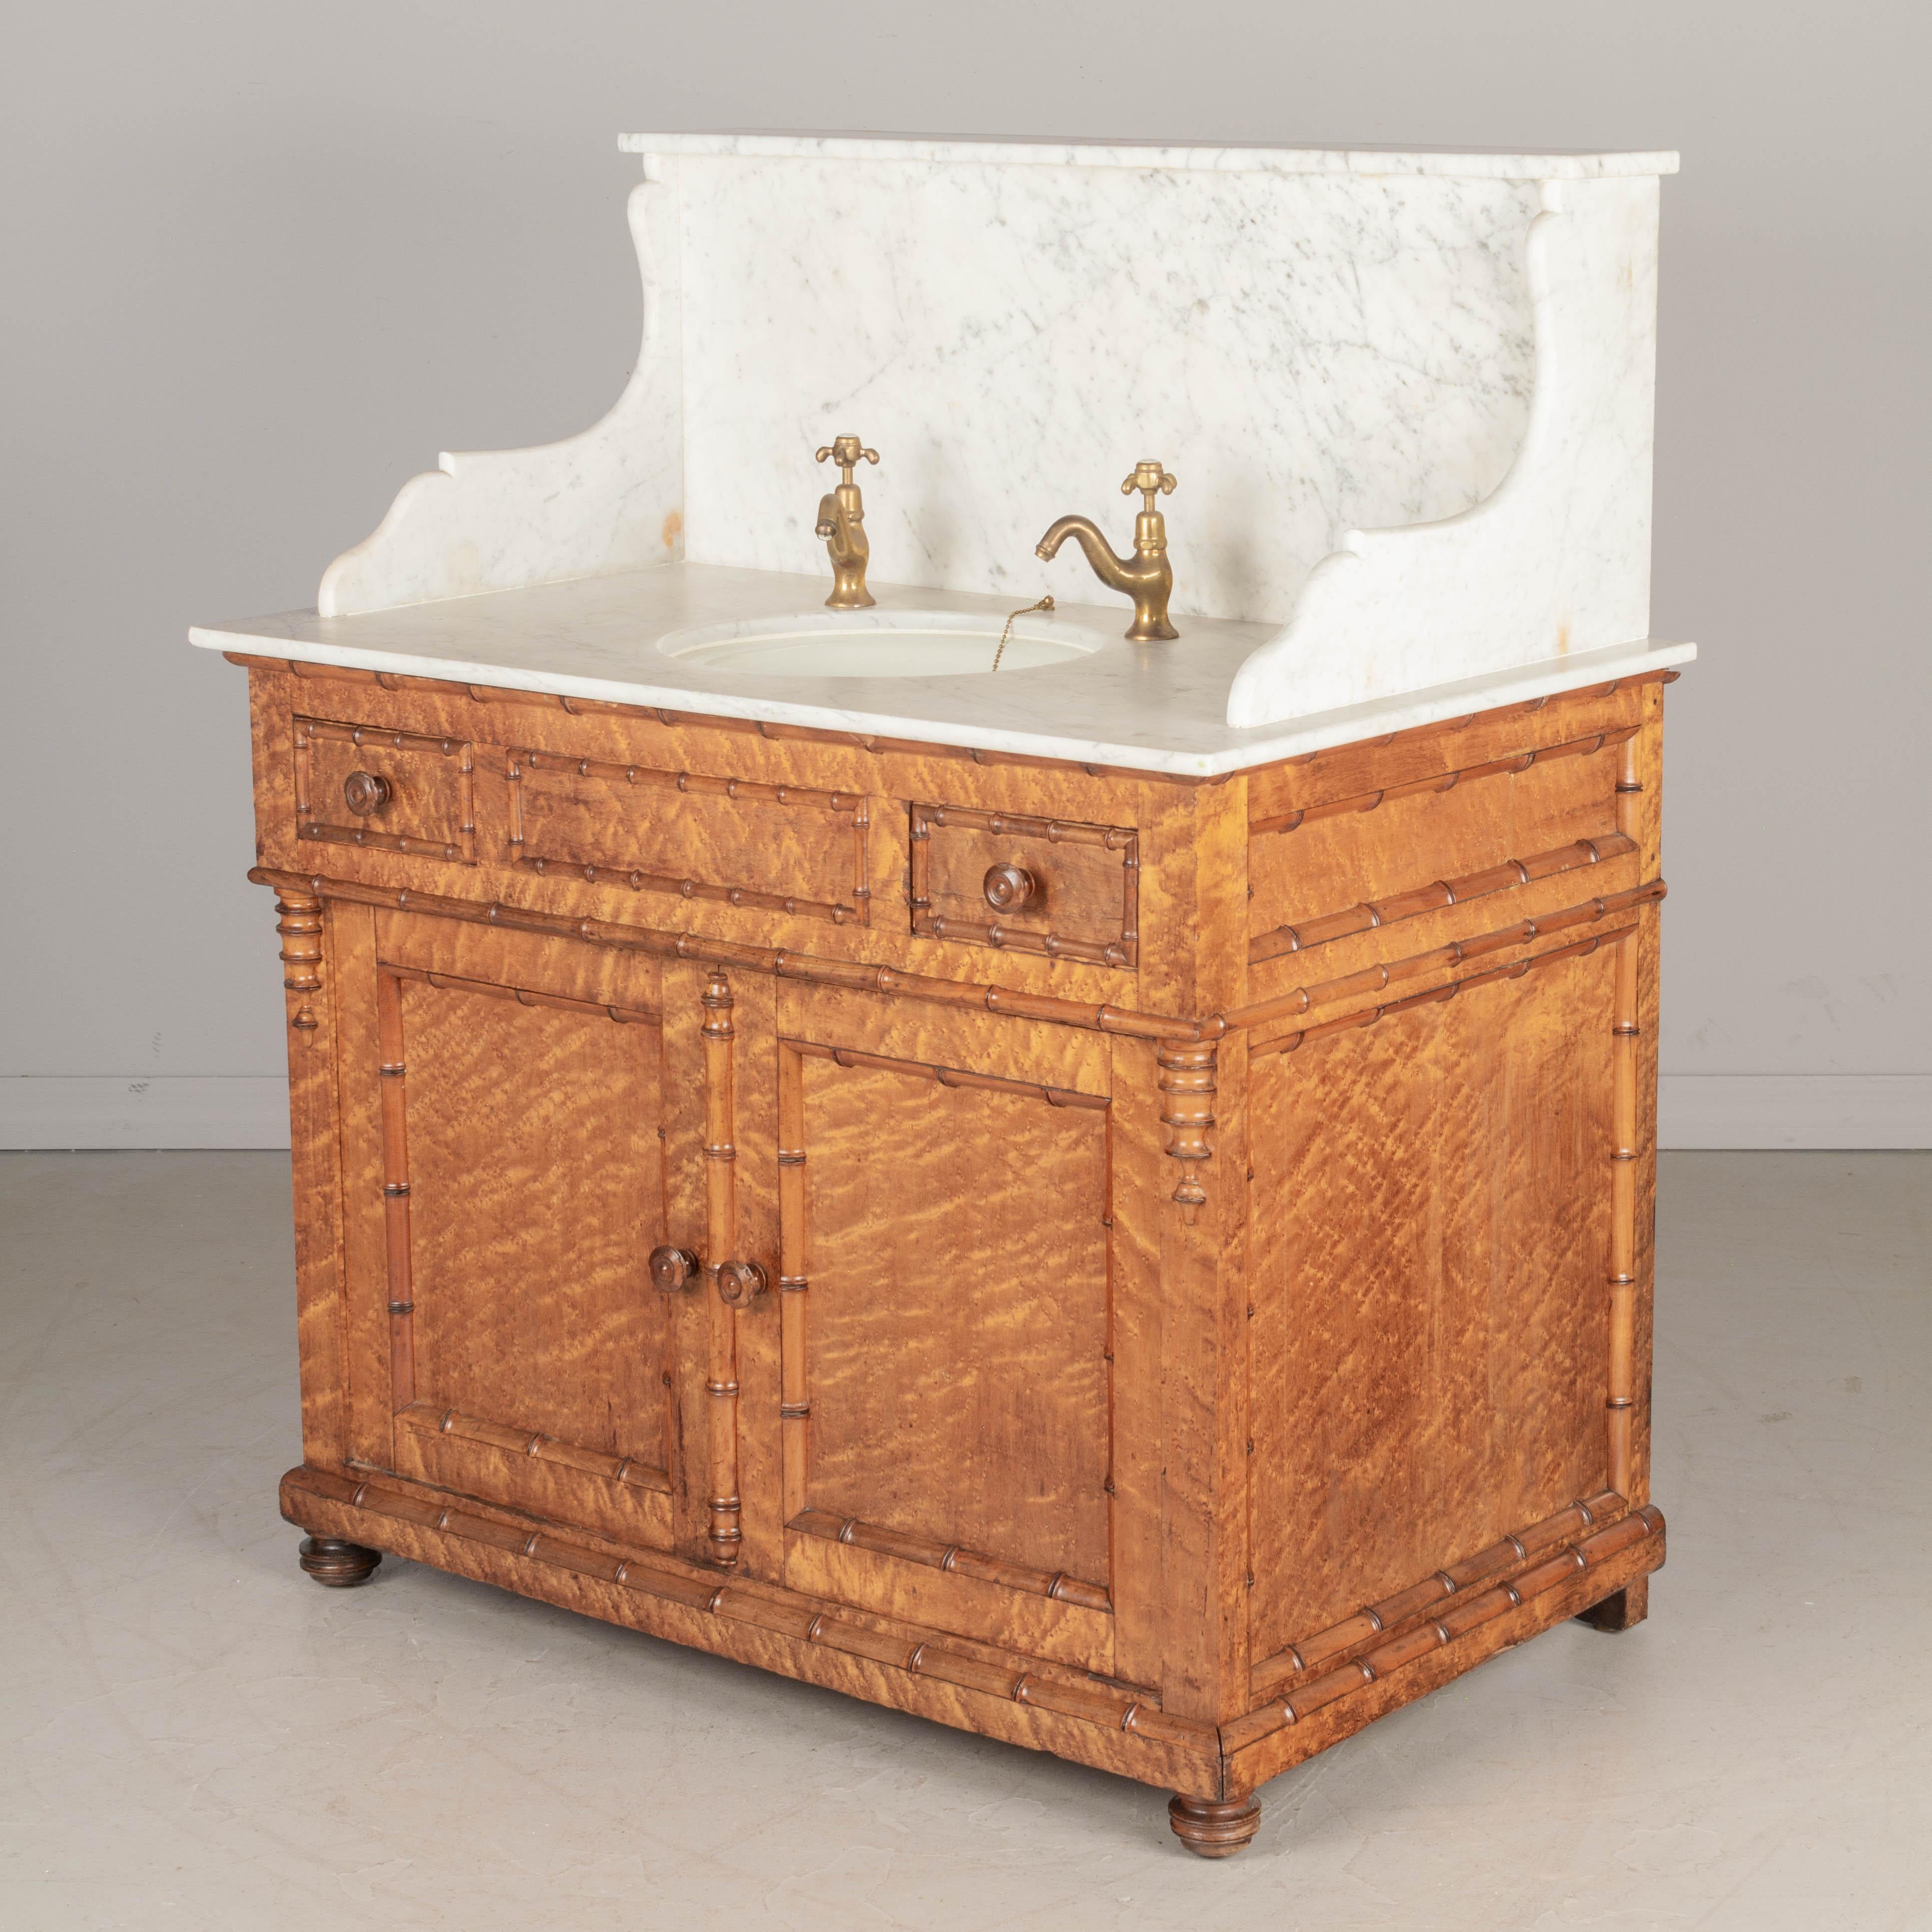 Hand-Crafted 19th Century French Faux Bamboo Marble Top Bathroom Vanity